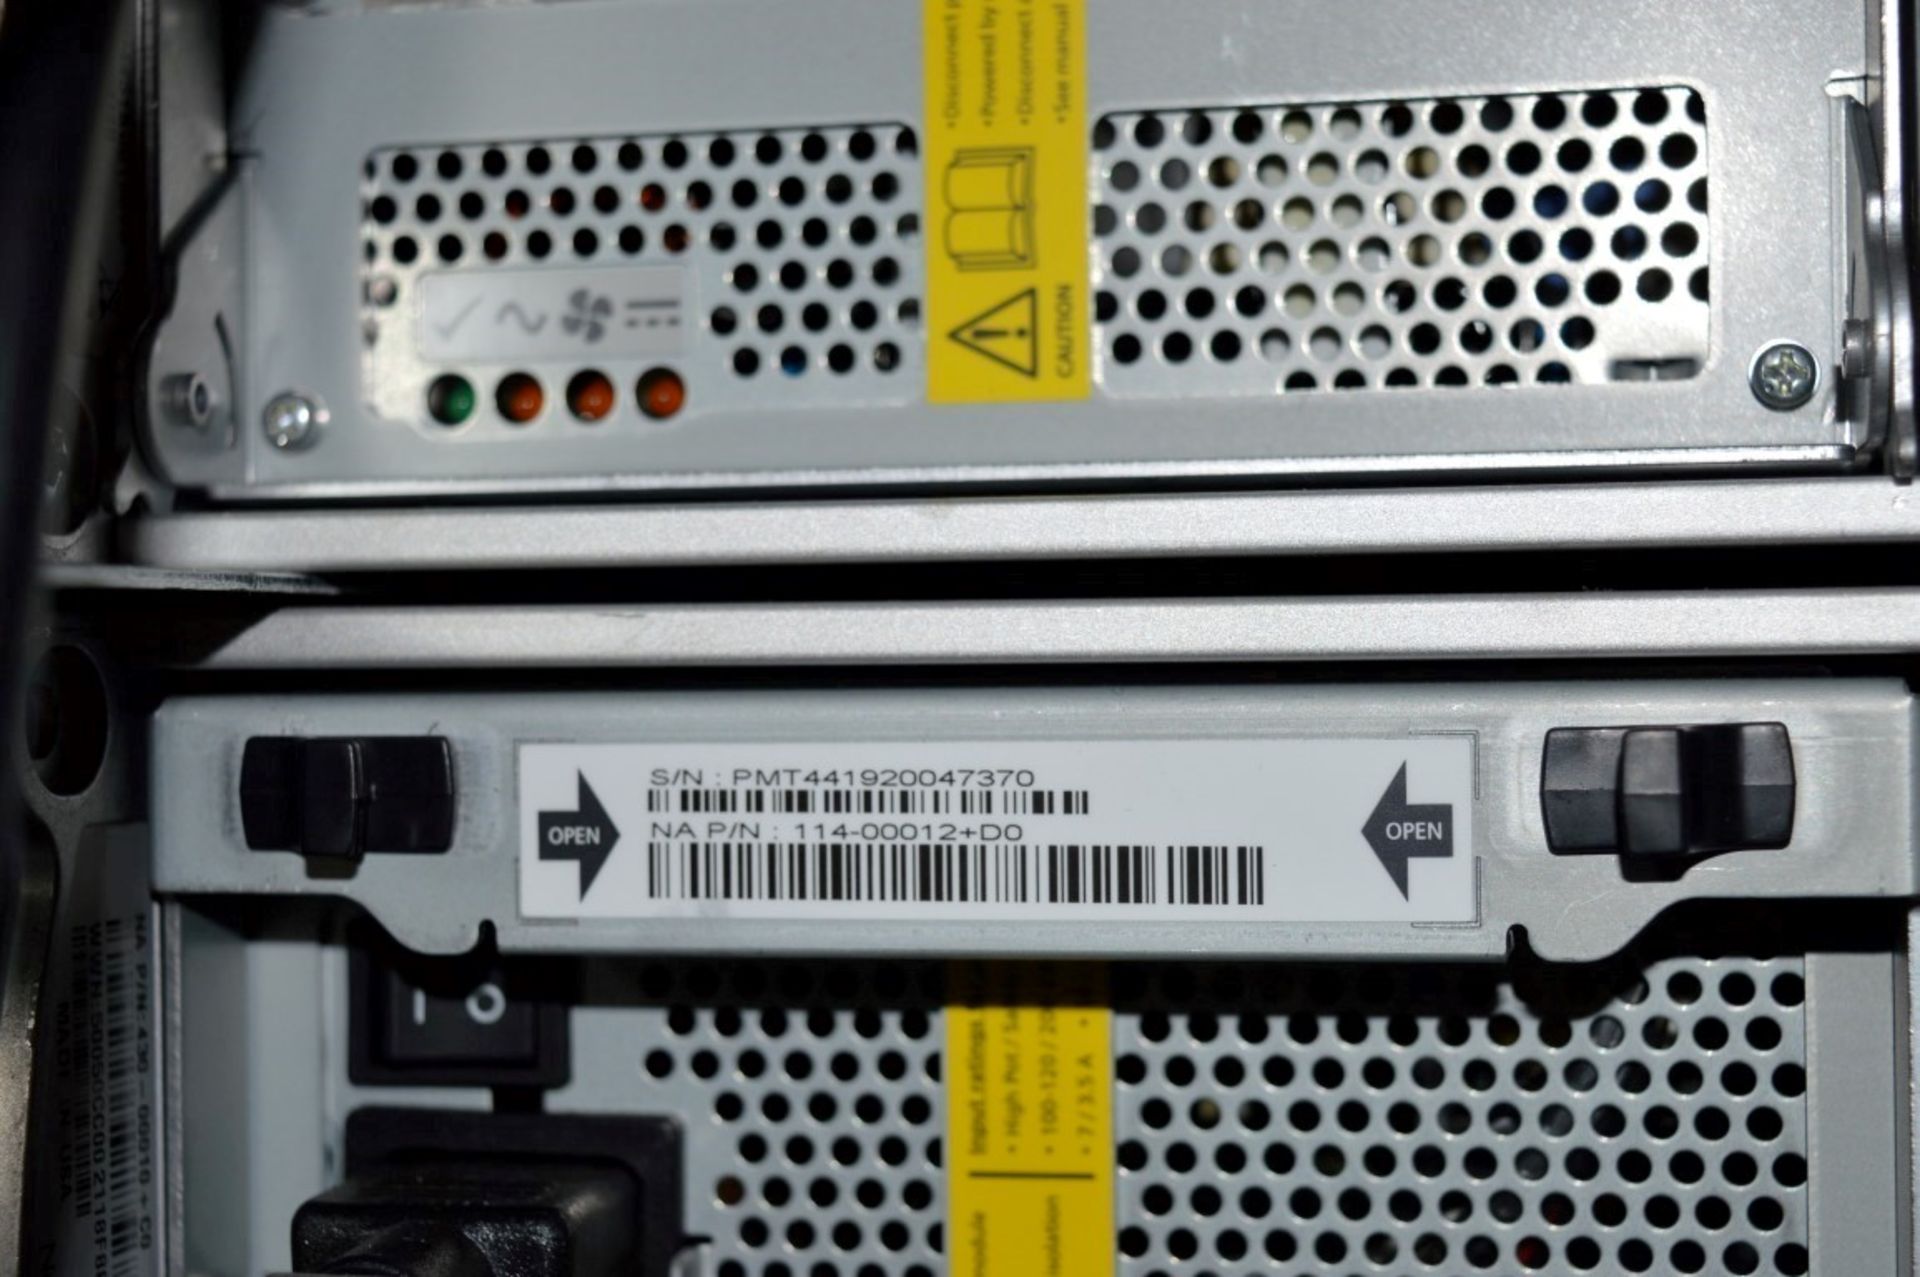 1 x Network Appliance Netapp Filer - Netapp Data Rack With 1 x FAS3140 Controller and 9 x DS14 MK2 - Image 17 of 23